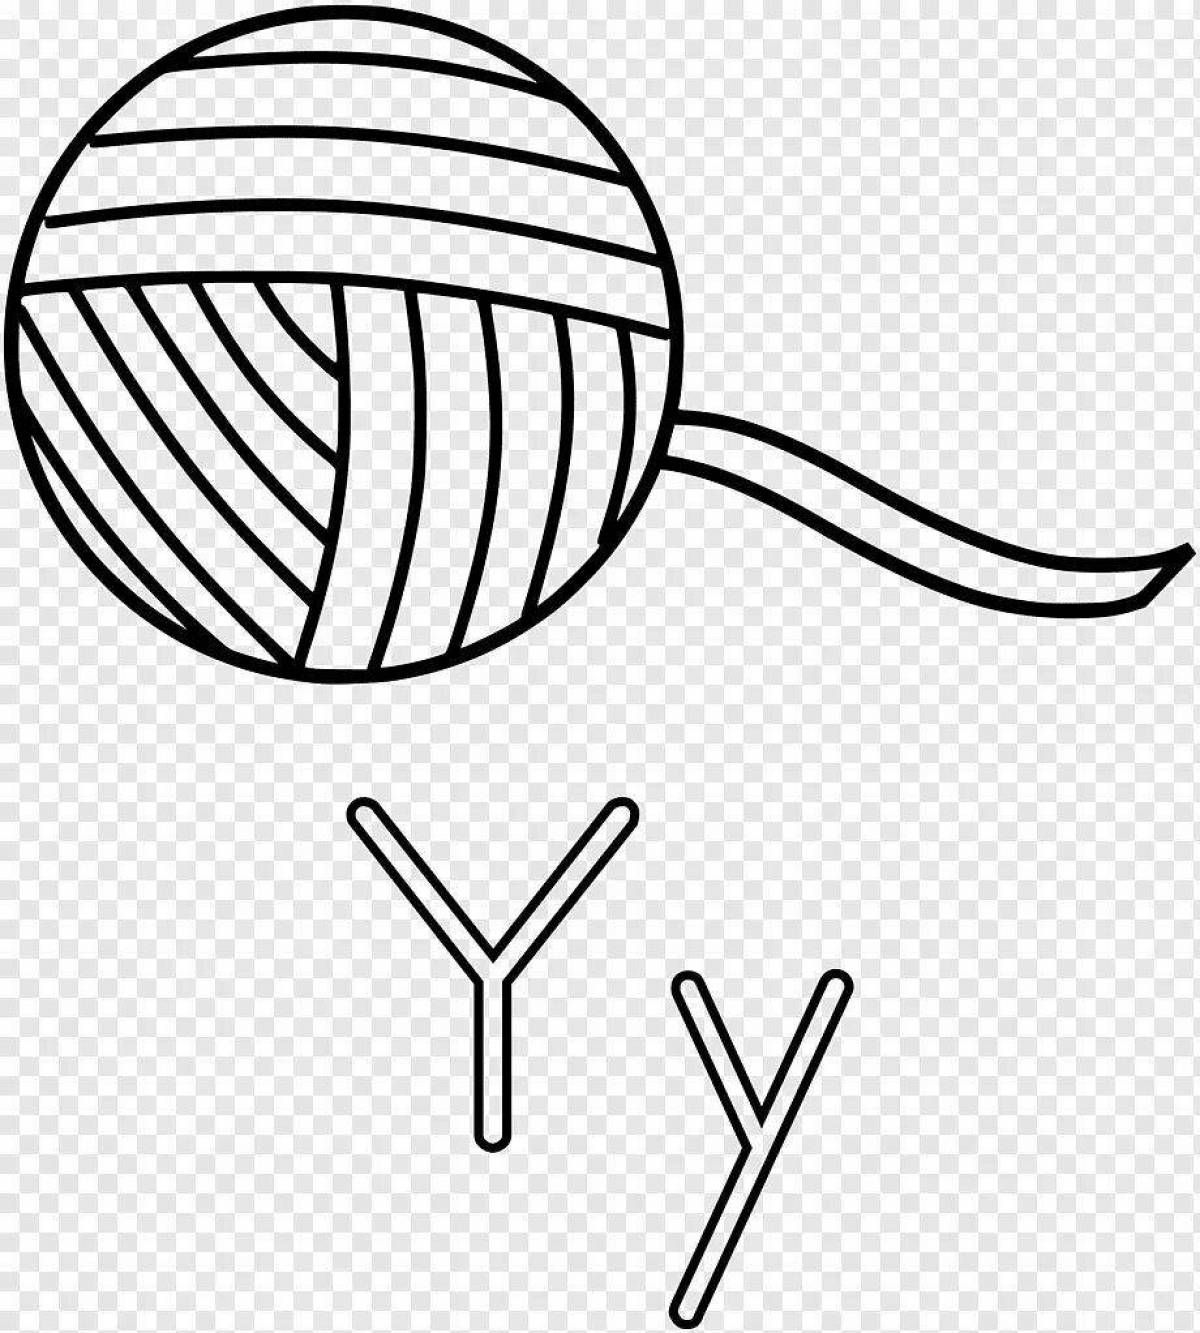 Shiny ball of thread coloring page